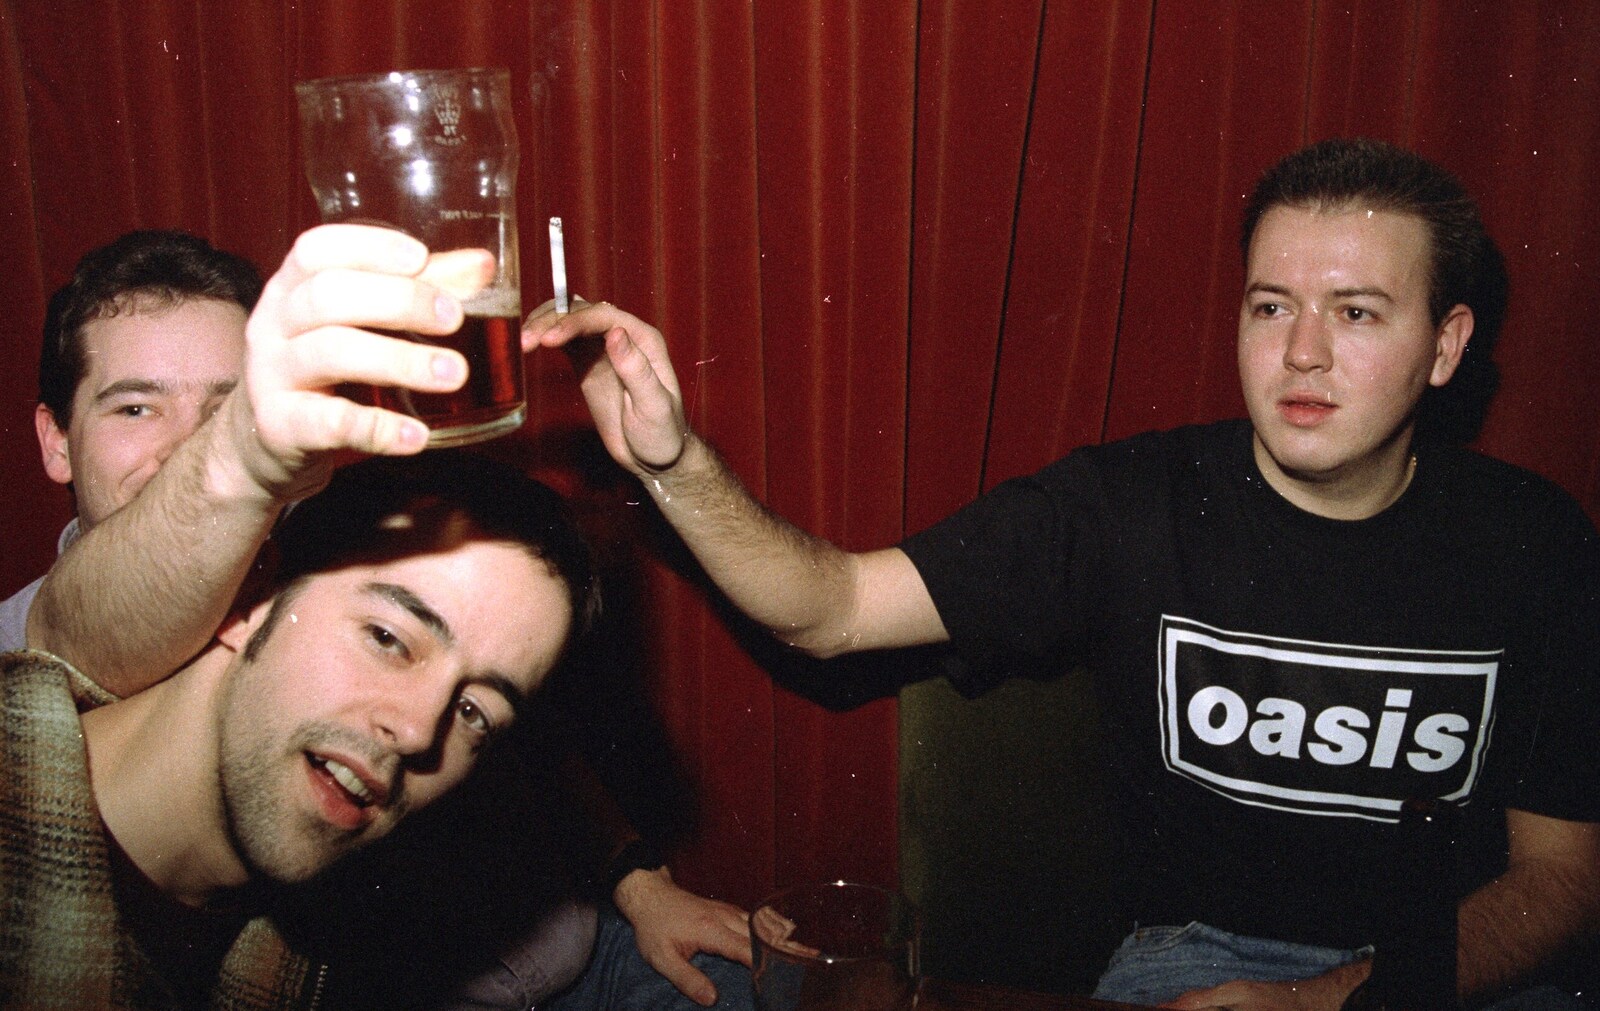 Russell, Trevor, Julian, fags and booze from Campbell Leaves CISU, Suffolk County Council, Ipswich, Suffolk - 4th May 1996